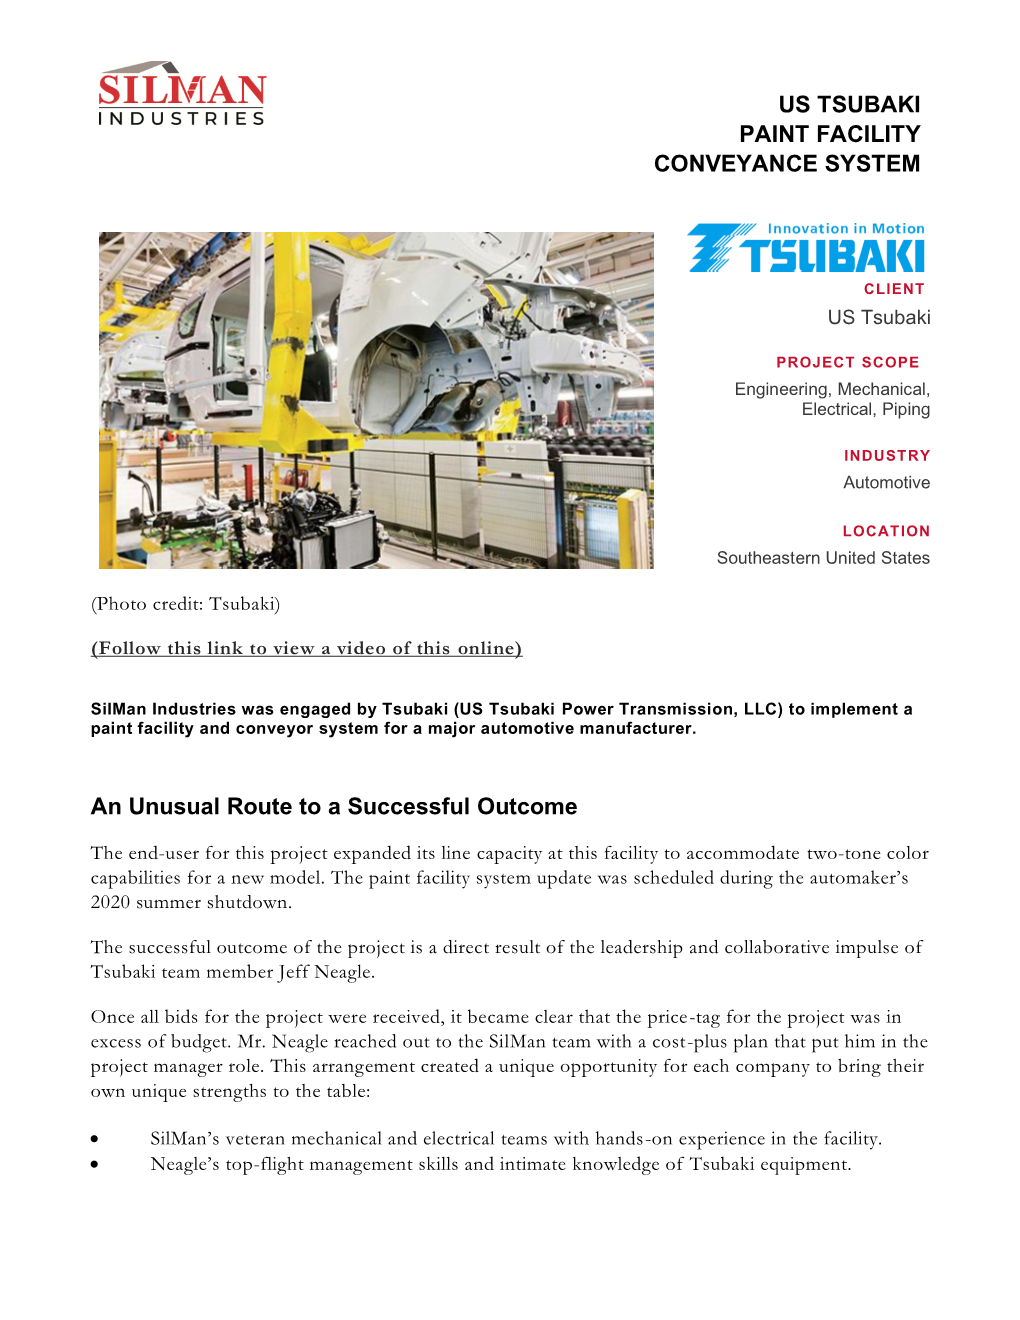 US TSUBAKI PAINT FACILITY CONVEYANCE SYSTEM an Unusual Route to a Successful Outcome